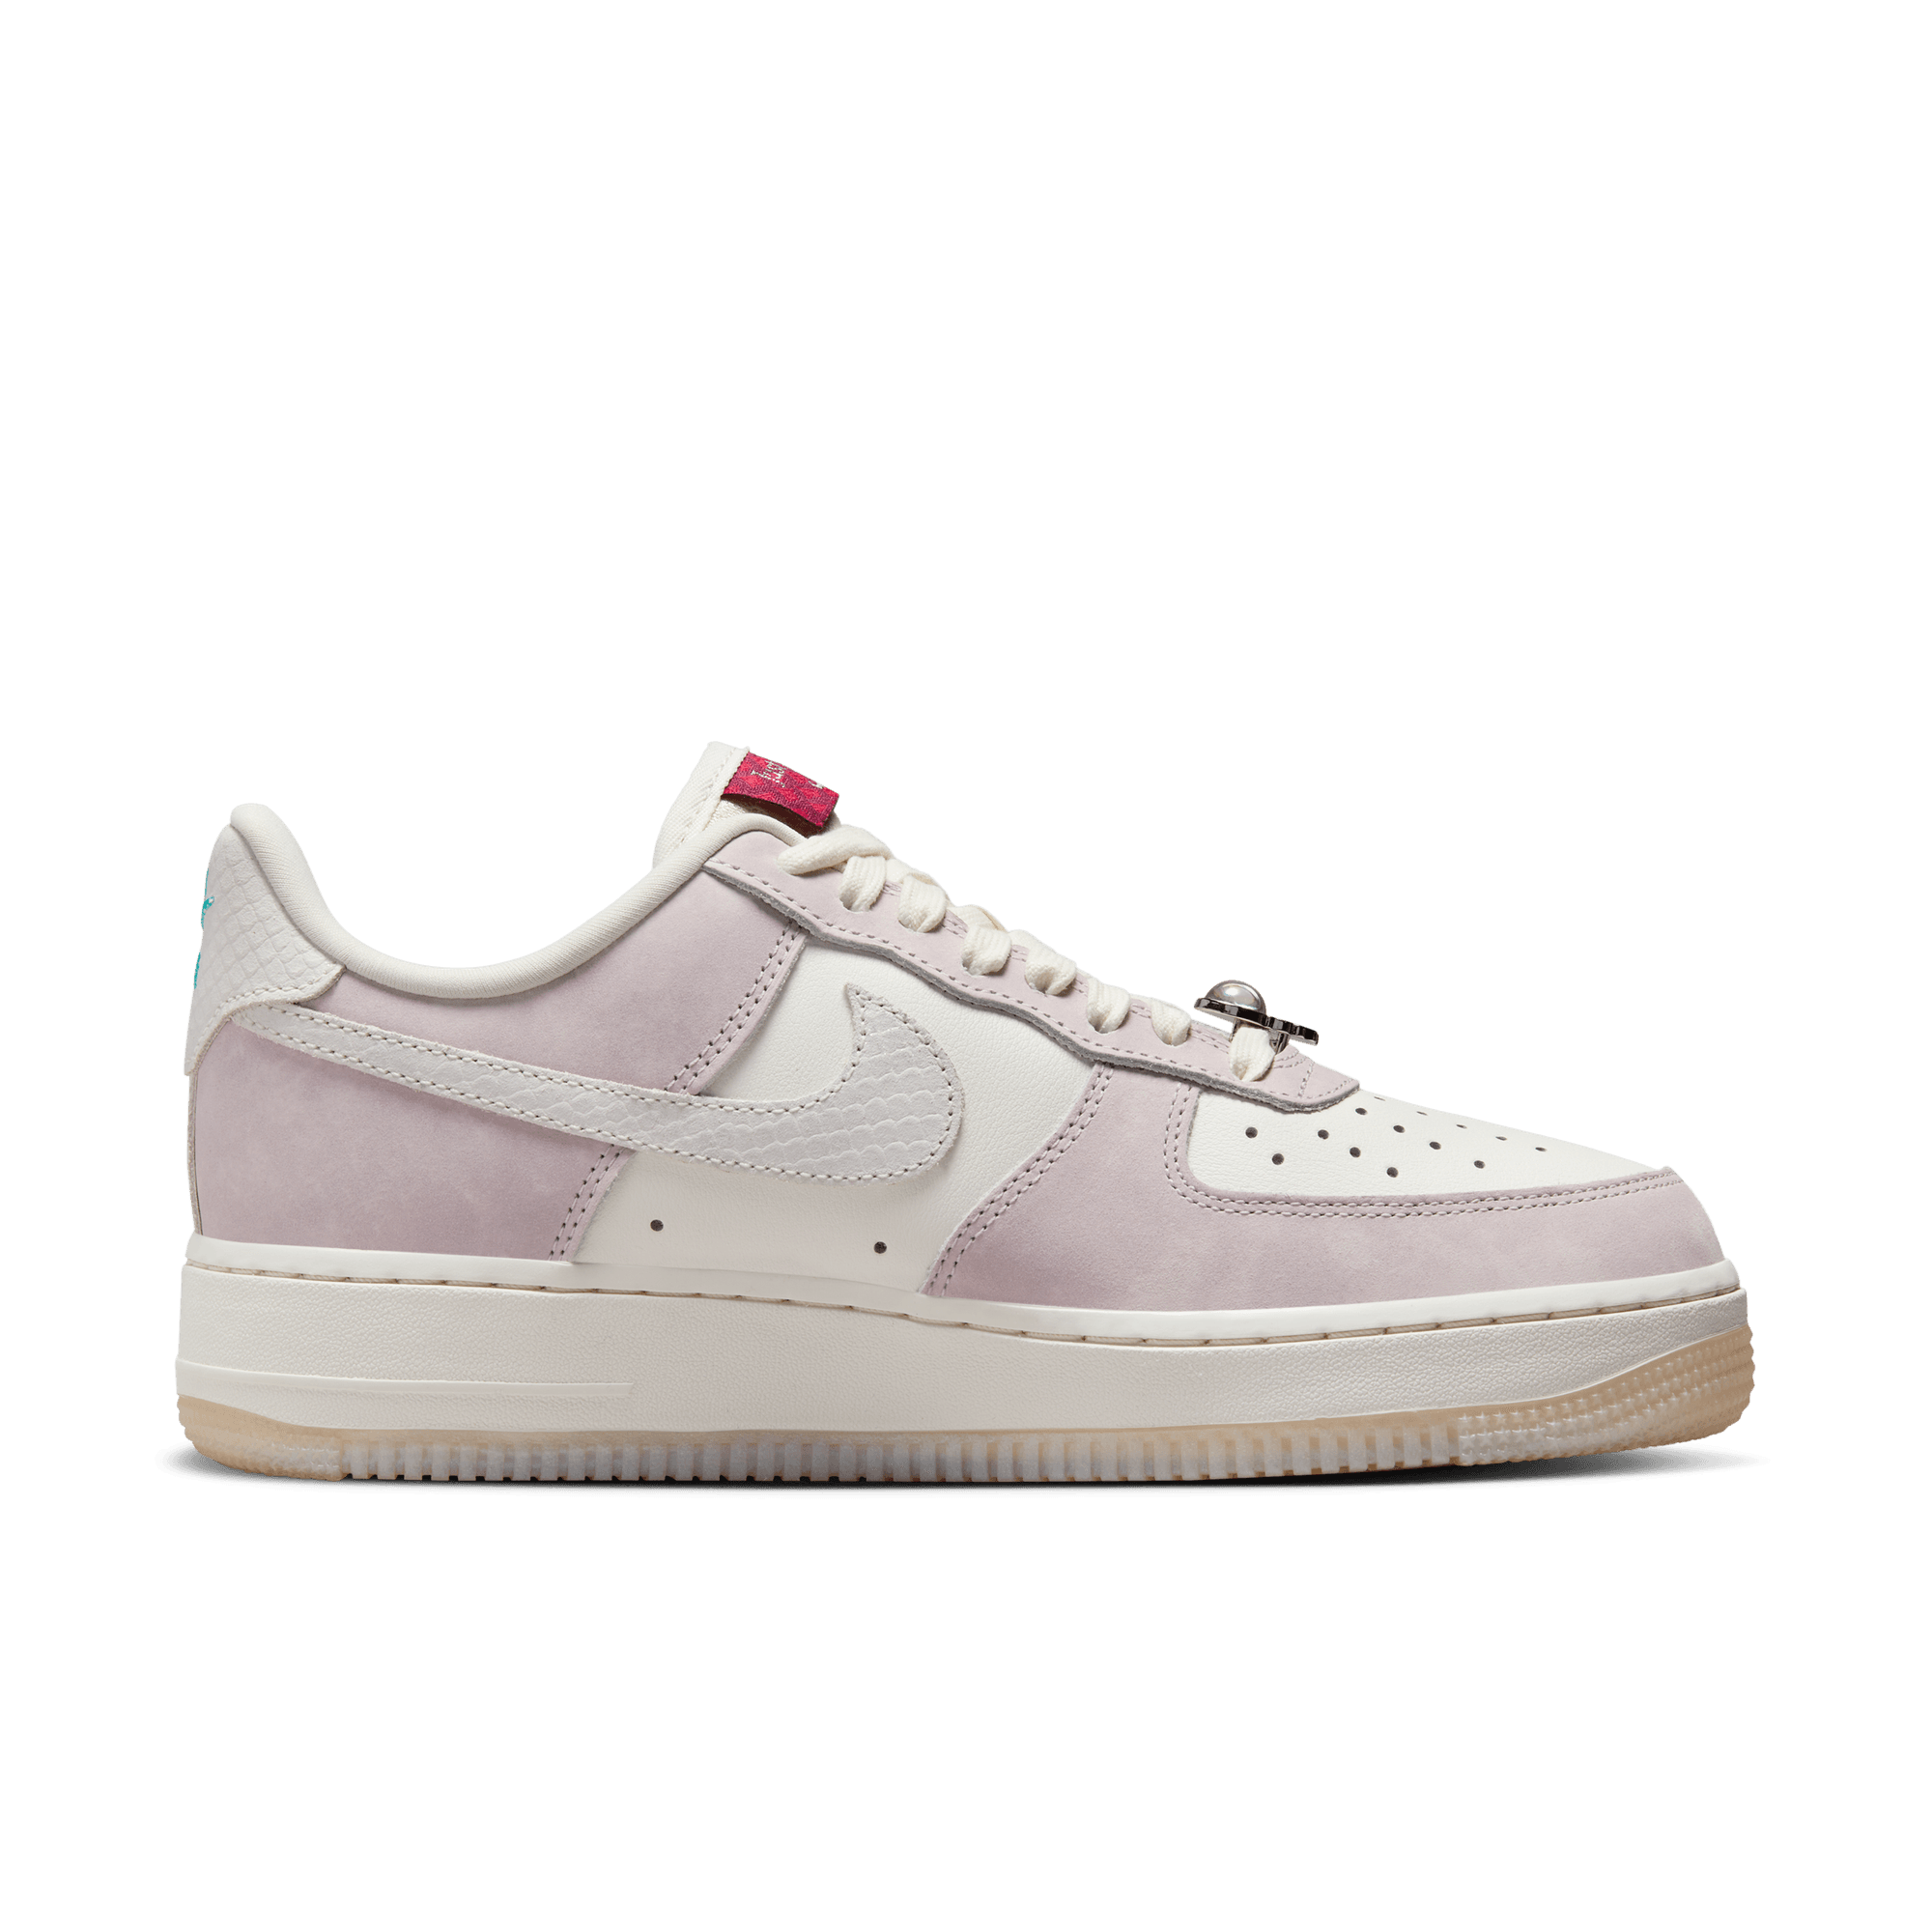 NIKE AIR FORCE 1 ’07 LX WOMEN'S SHOES